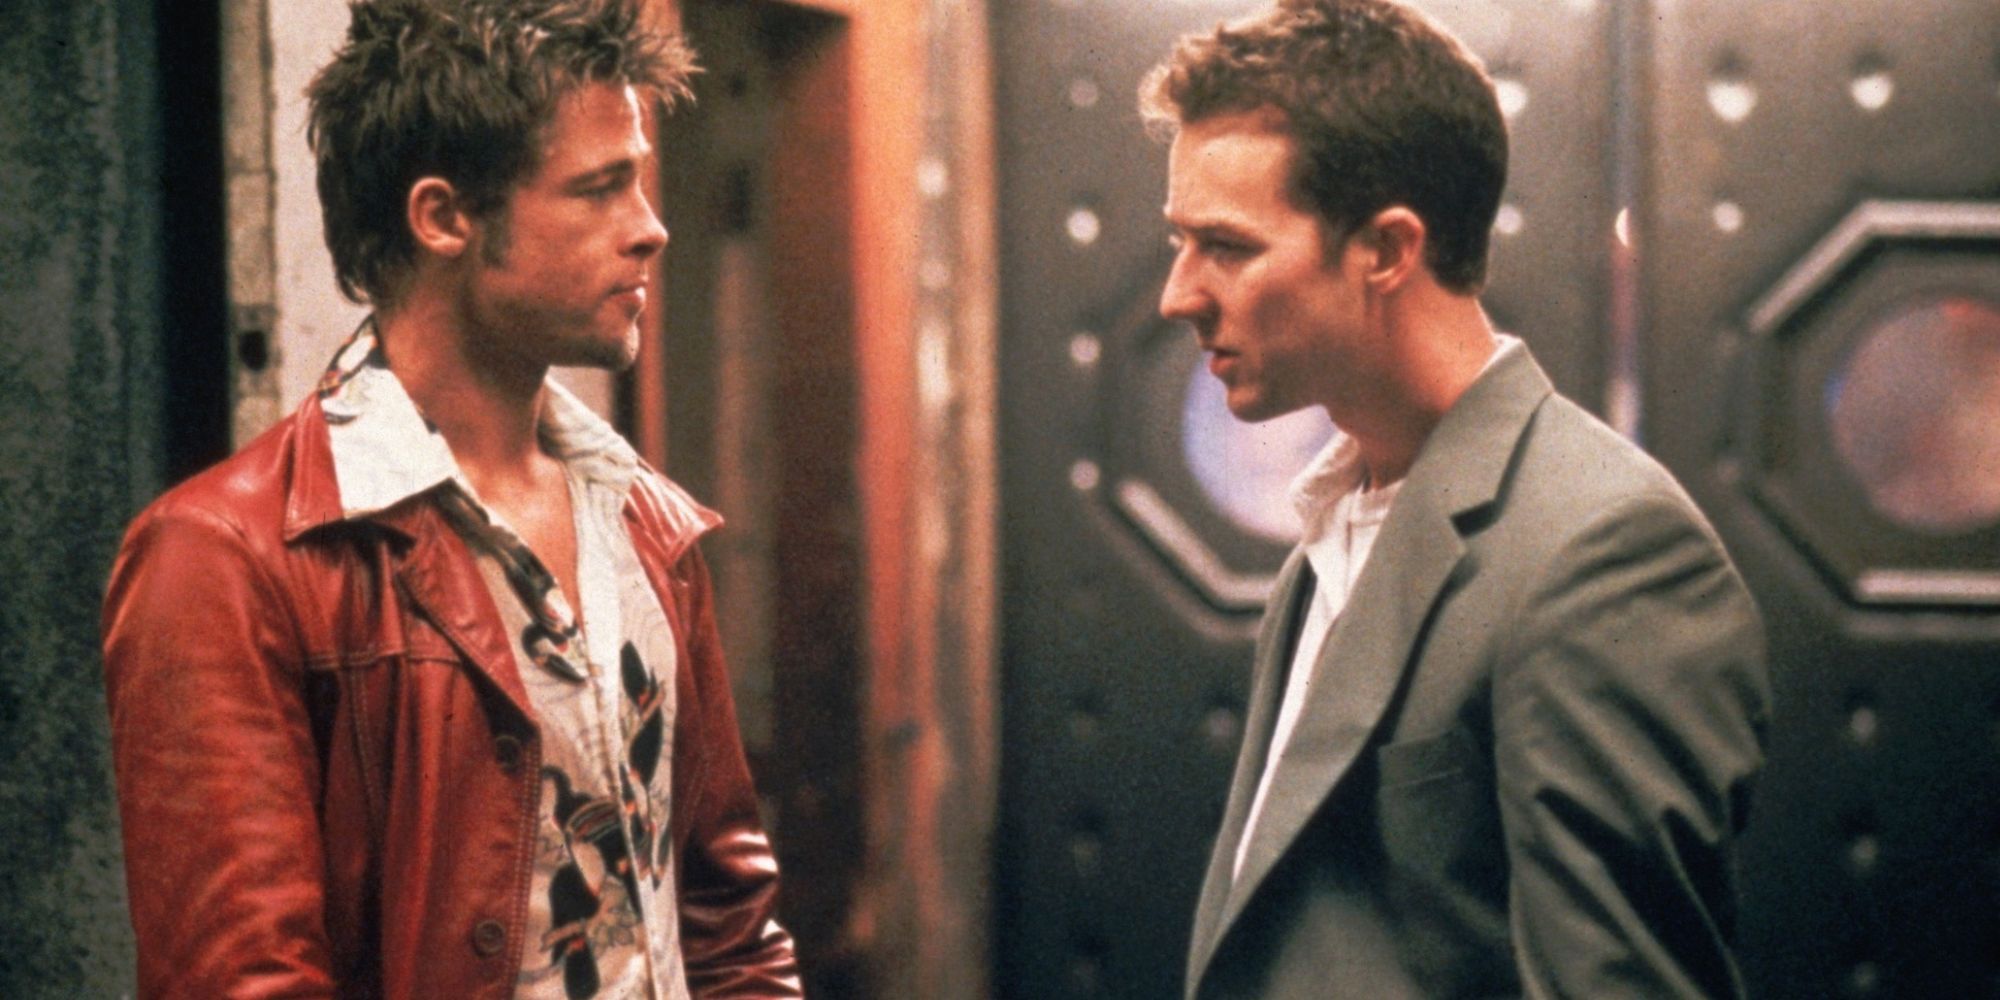 A man in a red leather jacket talks with a man in a grey suit outside a bar.